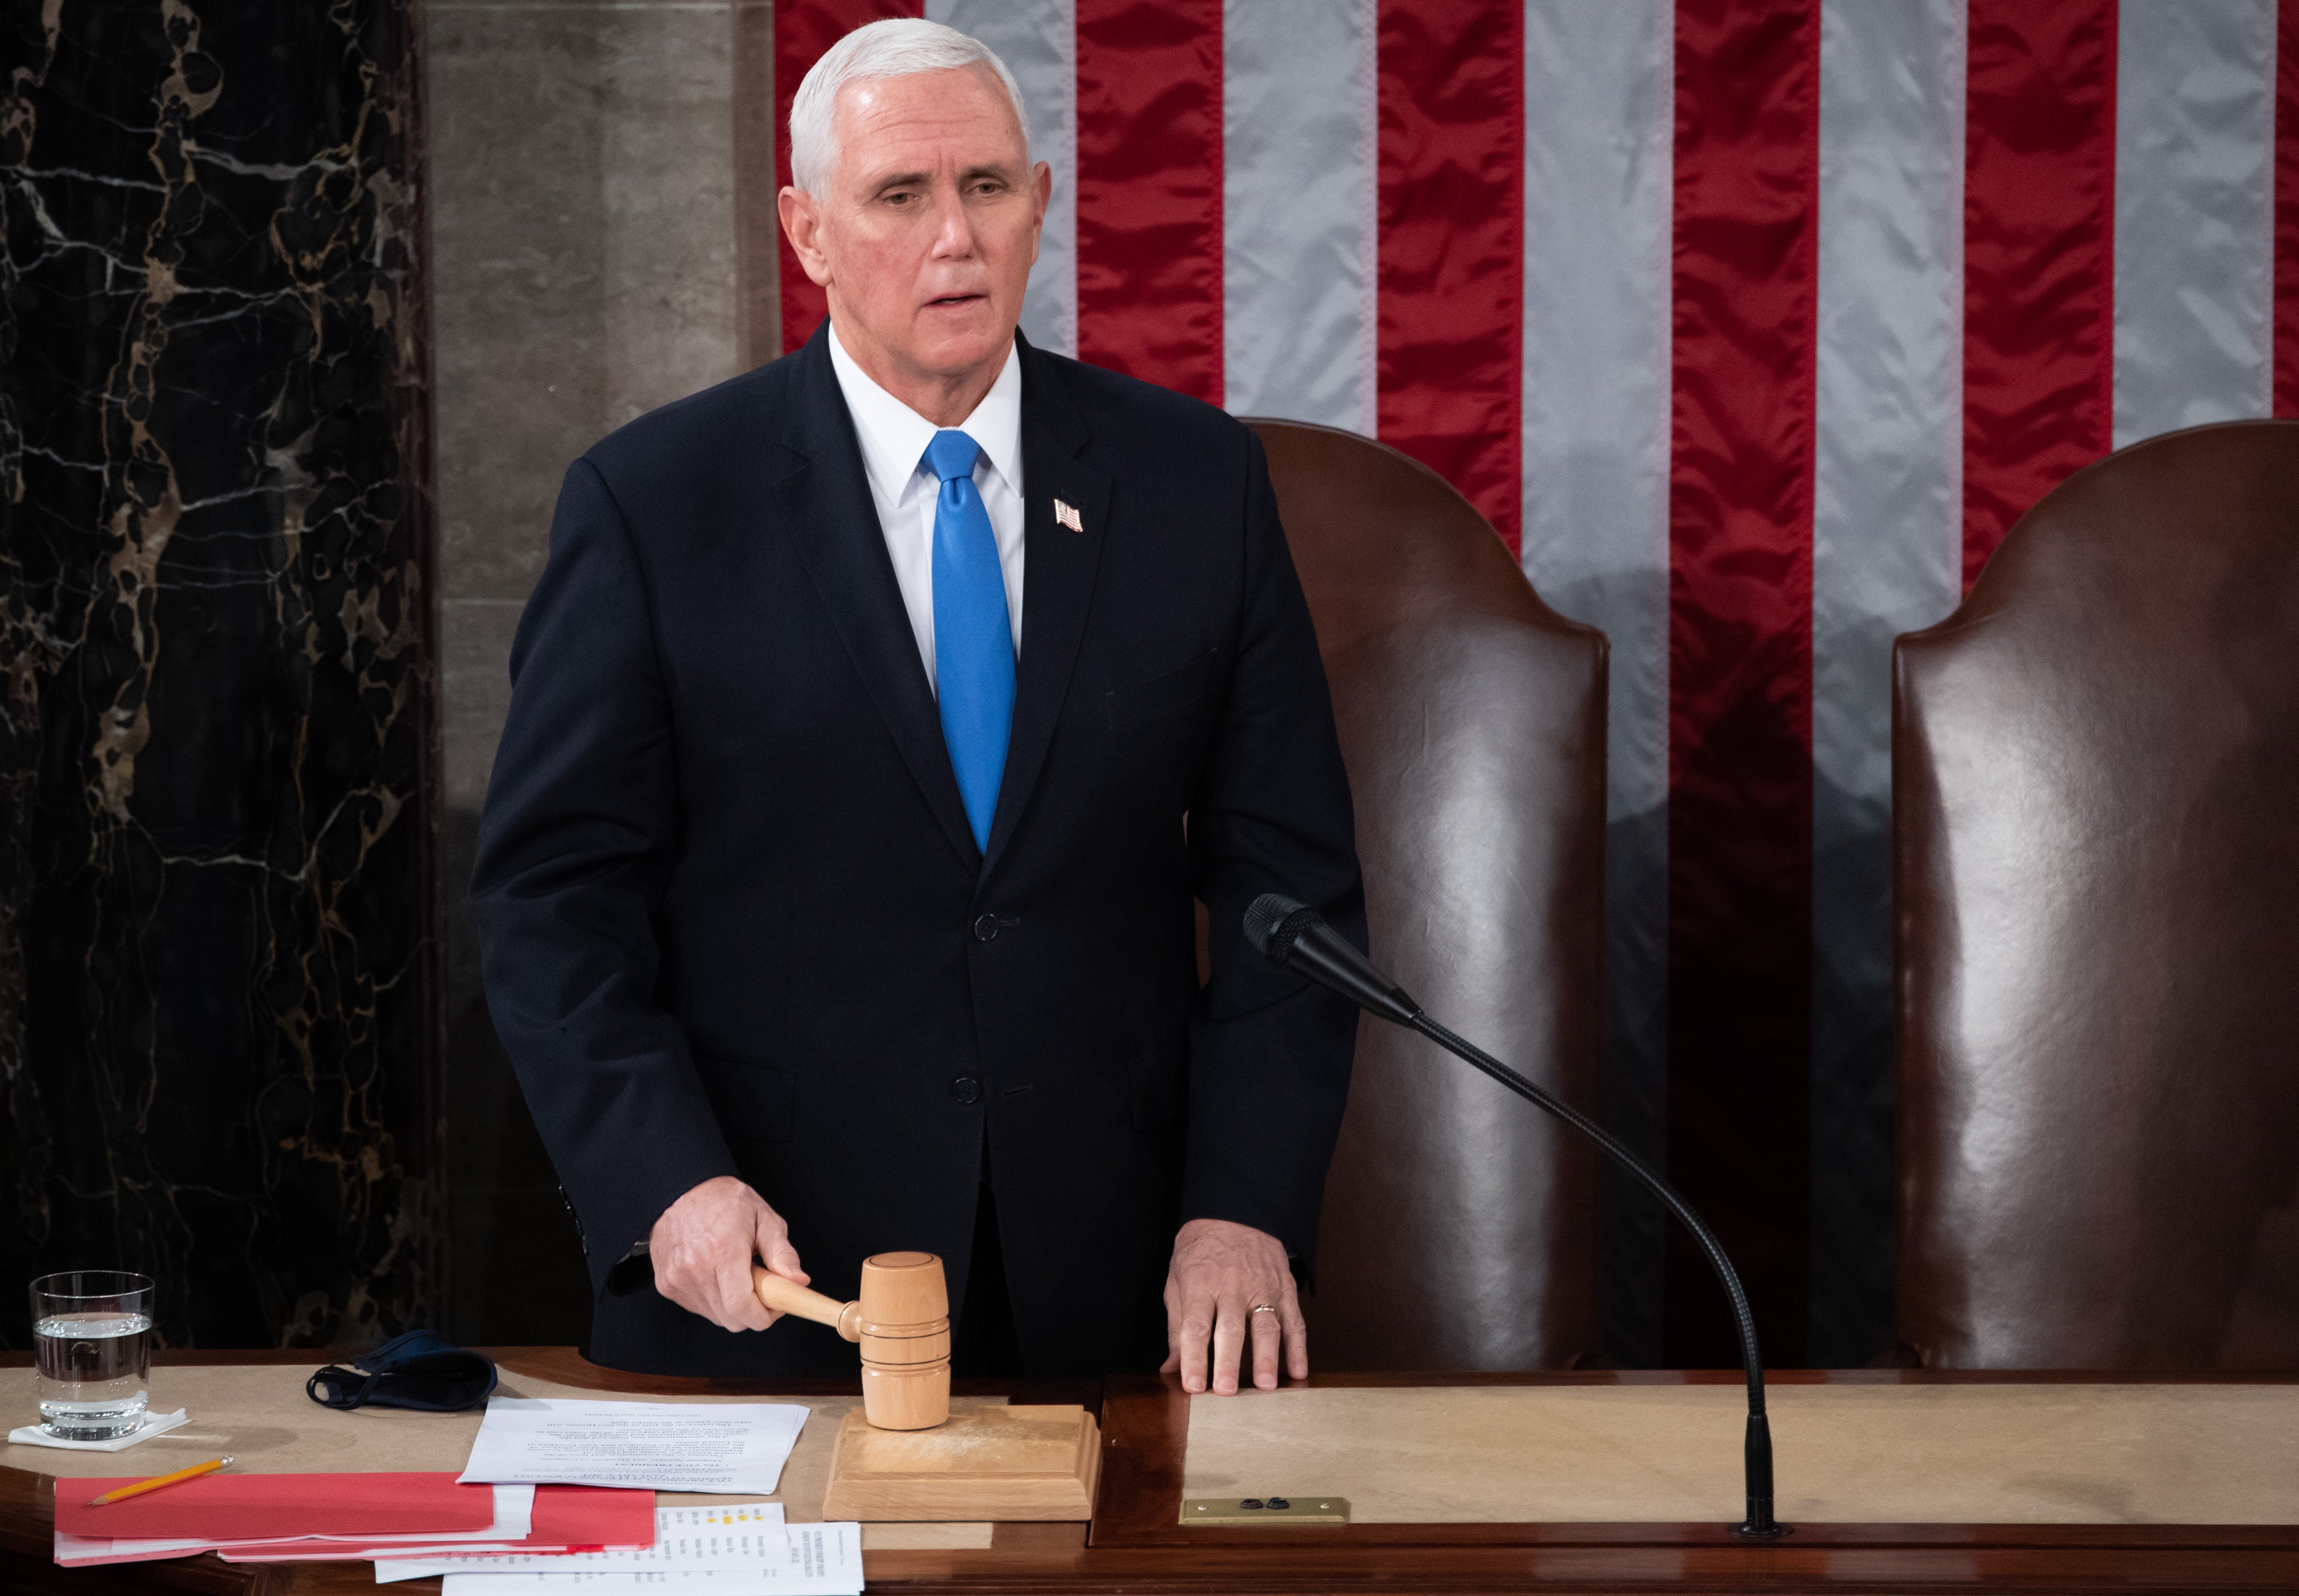 US Vice President Mike Pence presides over a joint session of Congress to count the electoral votes for President at the US Capitol in Washington, DC, January 6, 2021.